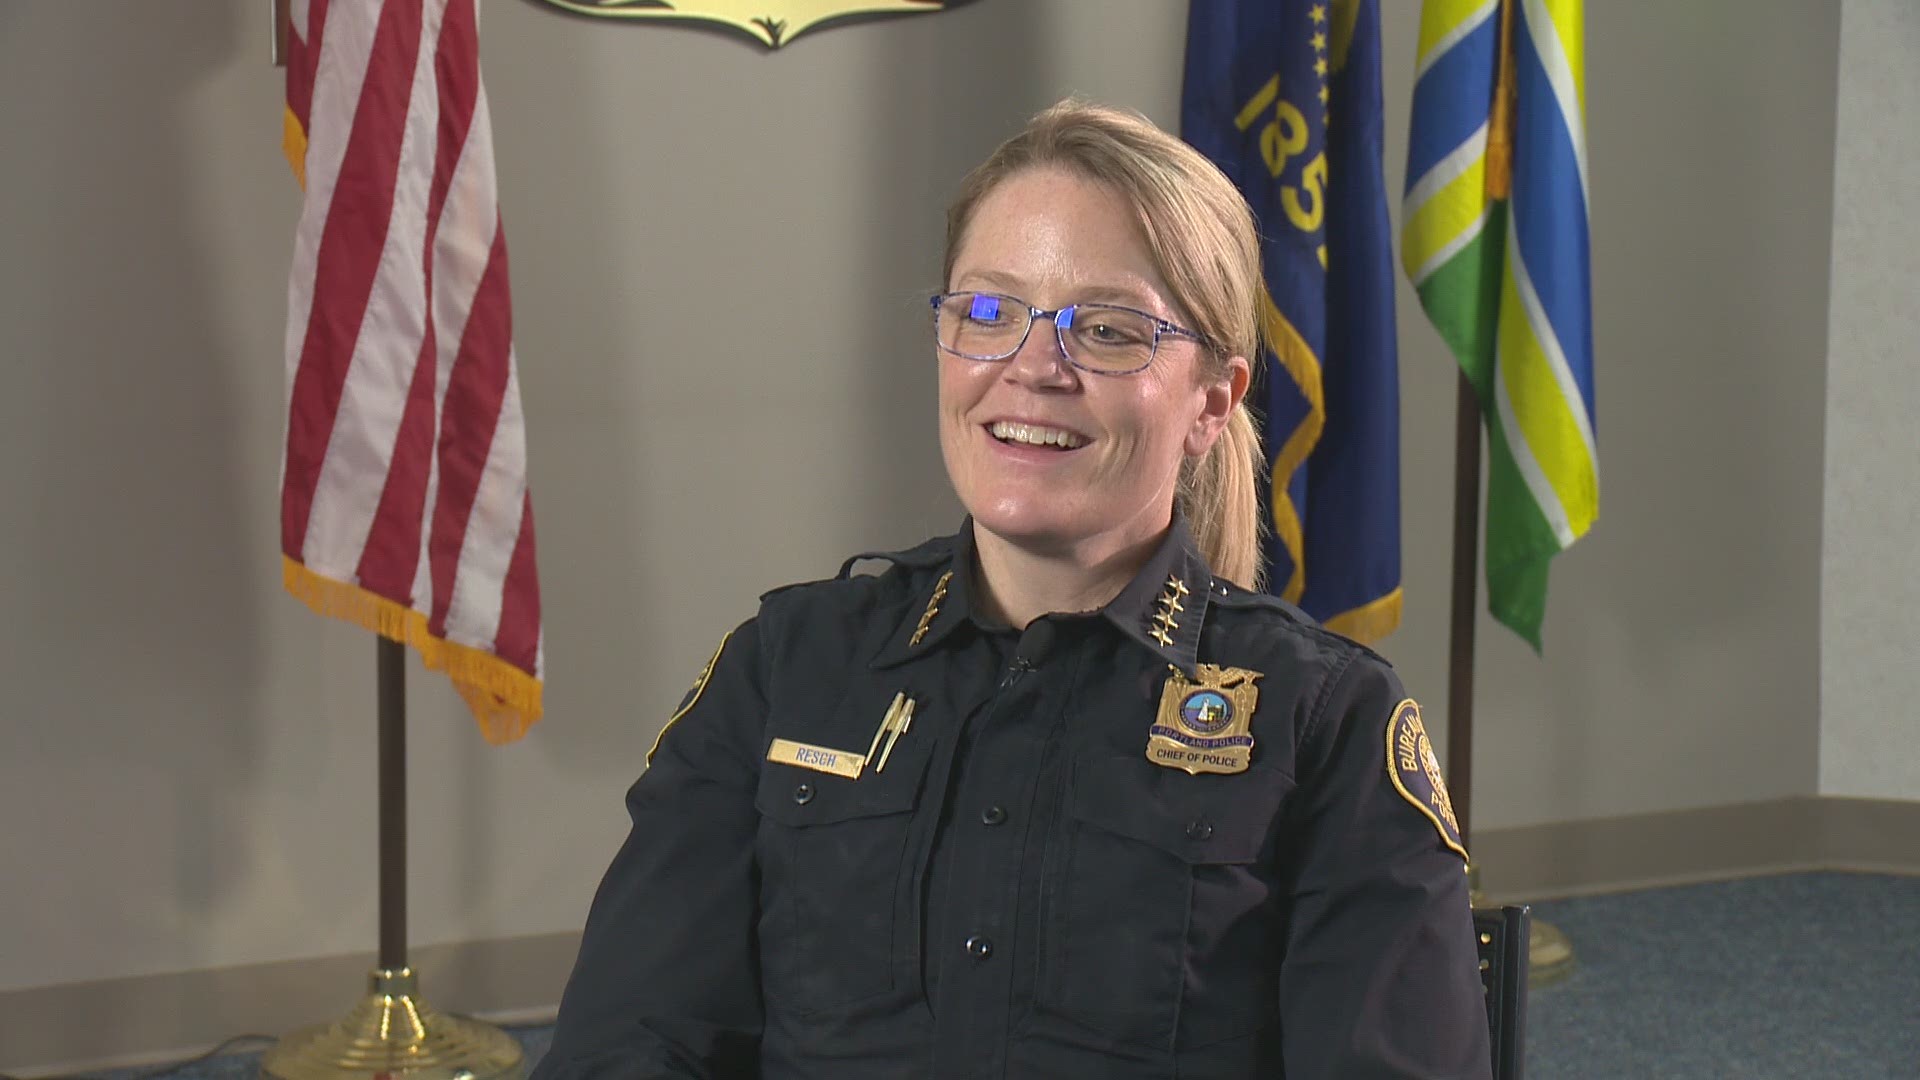 New Portland Police Chief Jami Resch was asked if she really wanted the job. This is her response.